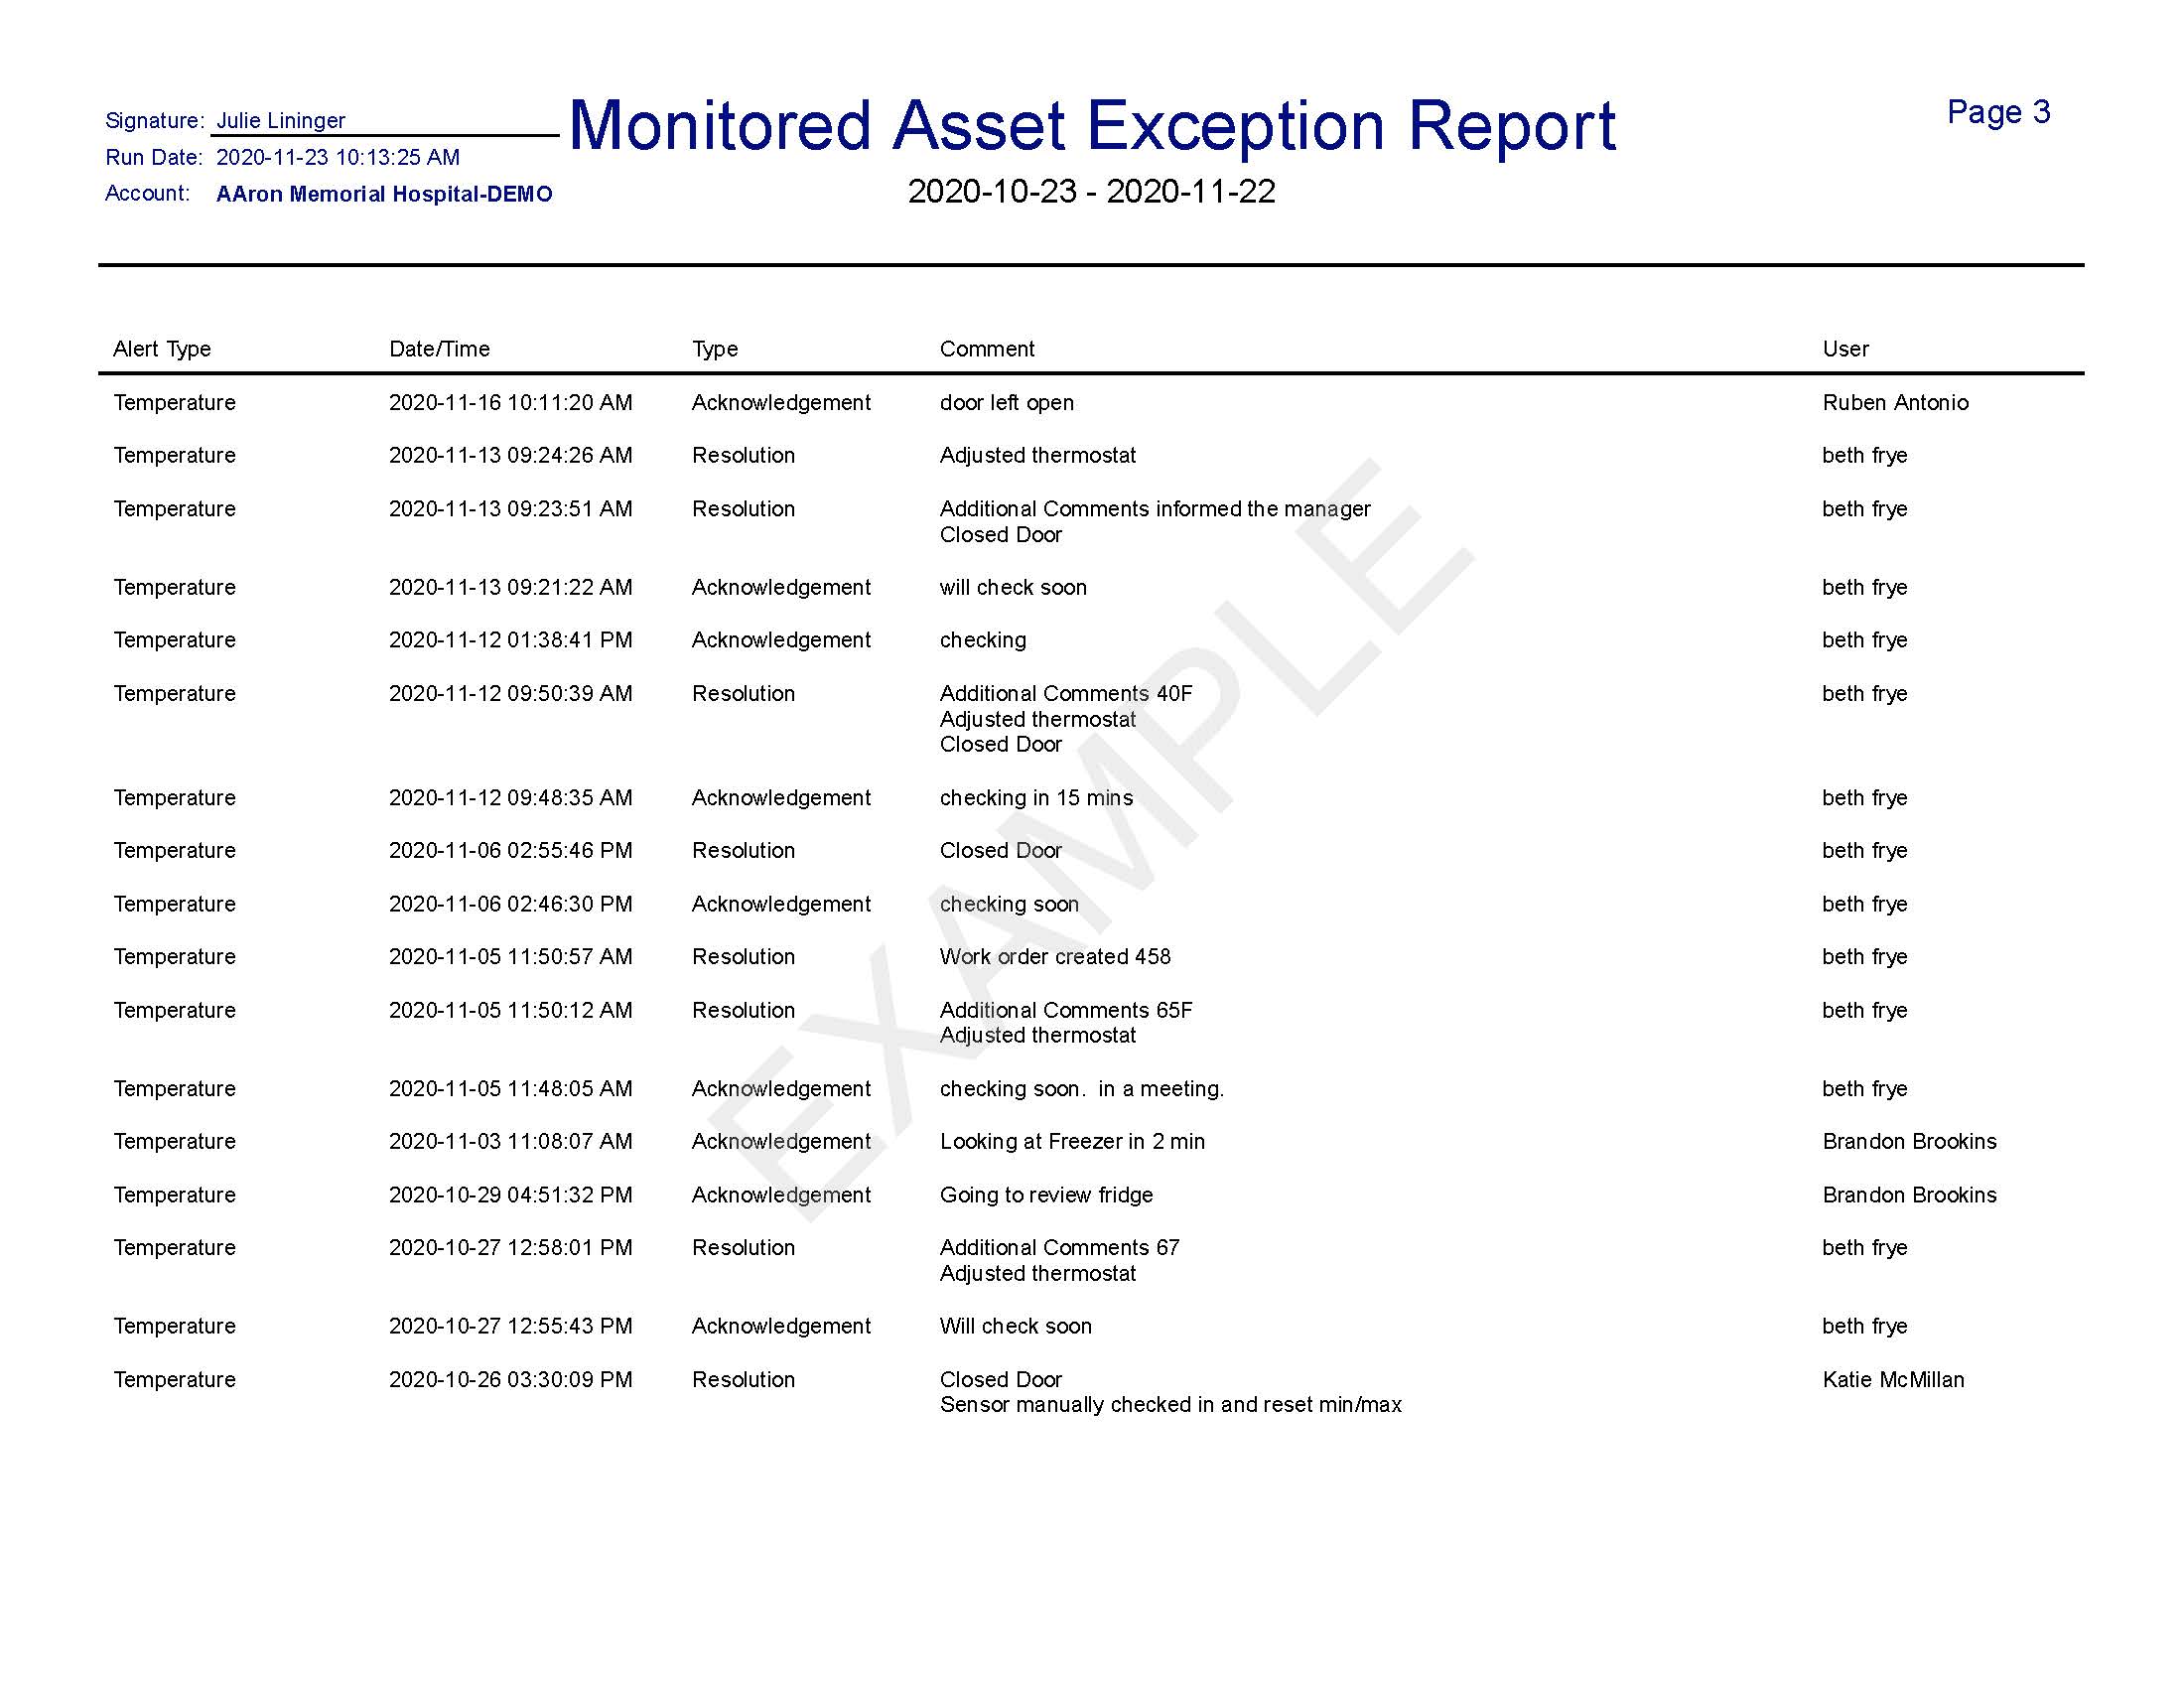 sense-monitored-asset-exception-report_Page_3.jpg